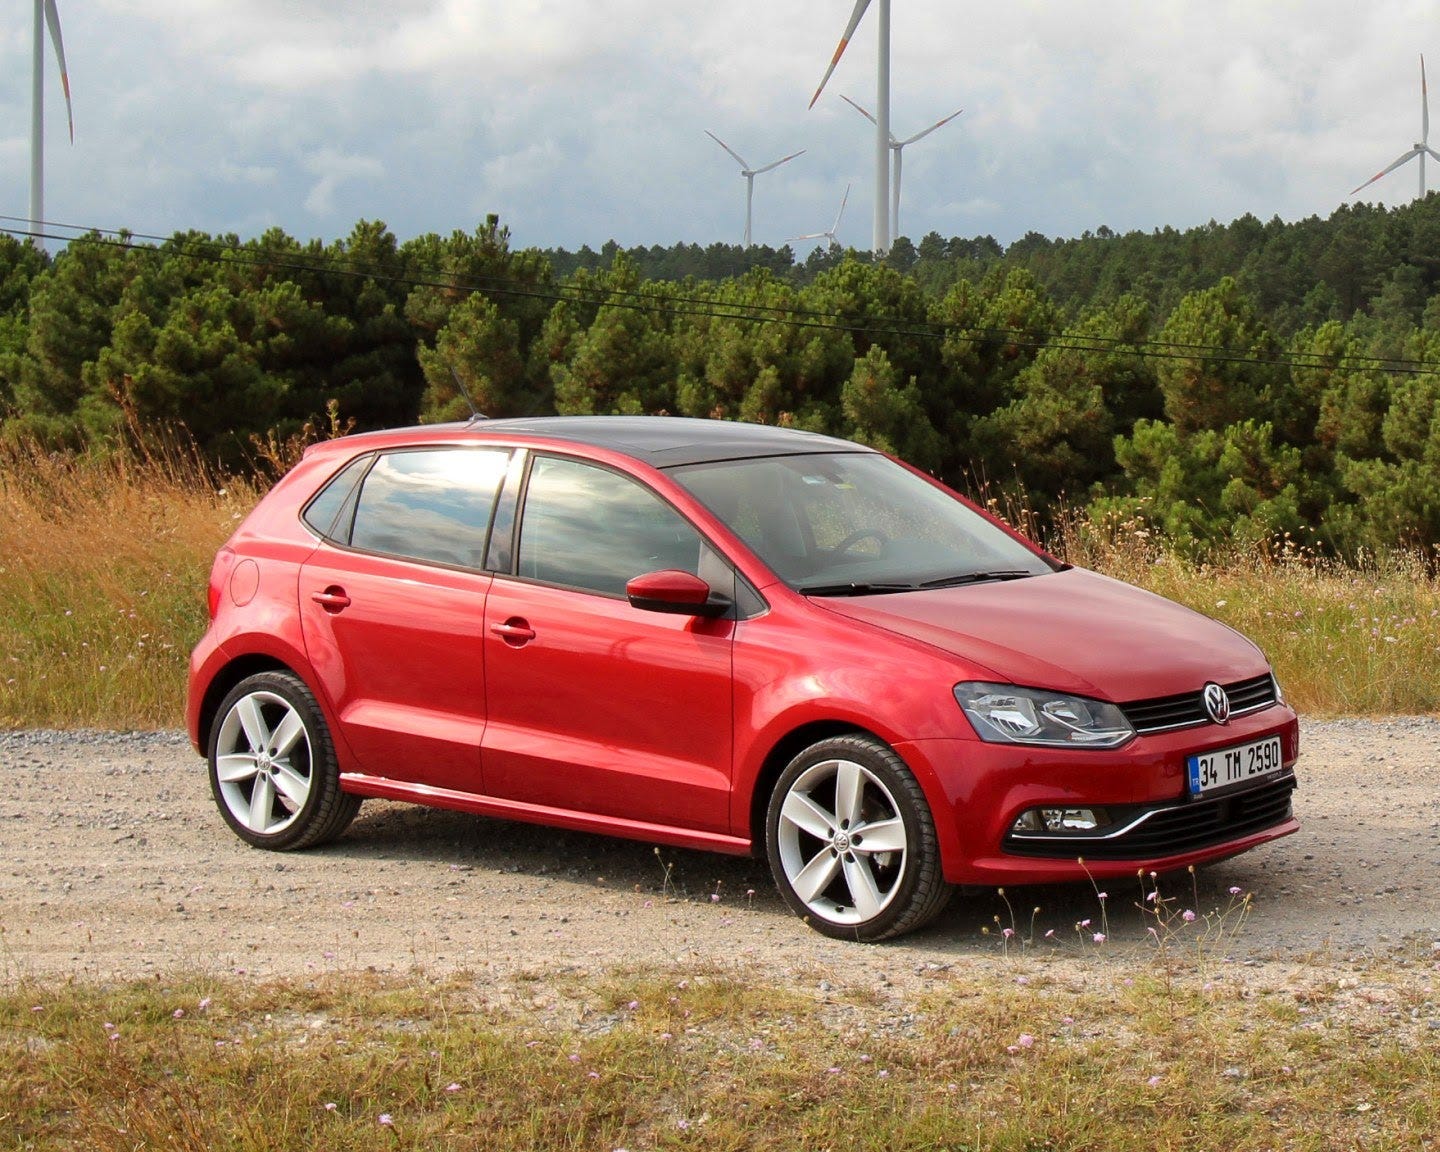 The Volkswagen Polo TSI 1.2 A review by a longdistance